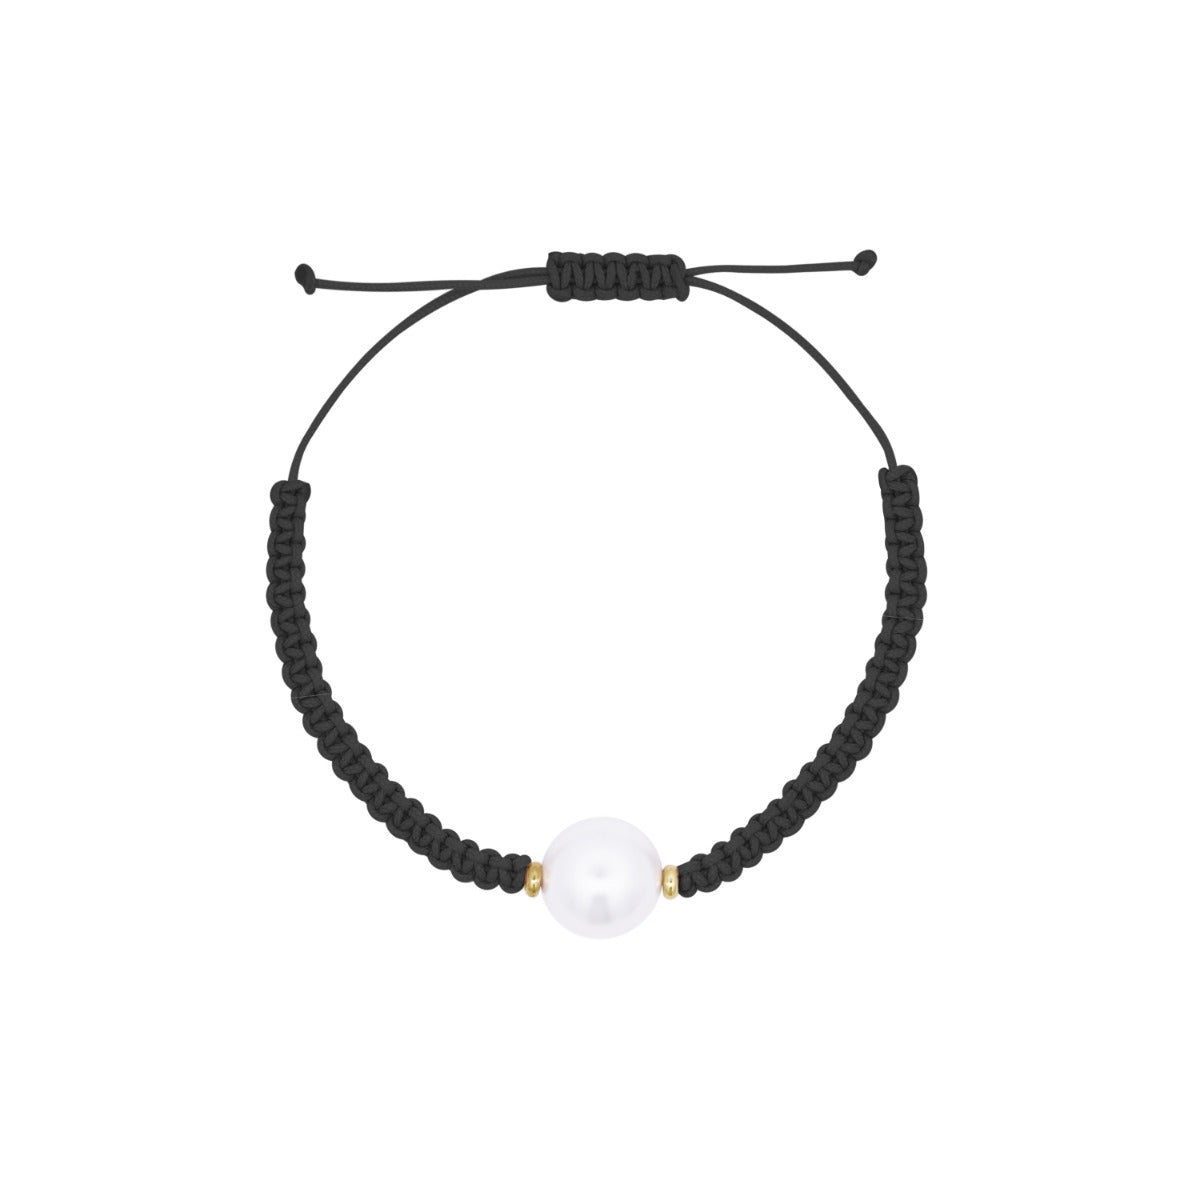 Bracelet black scooby-doo and central pearl -WHITESIDE